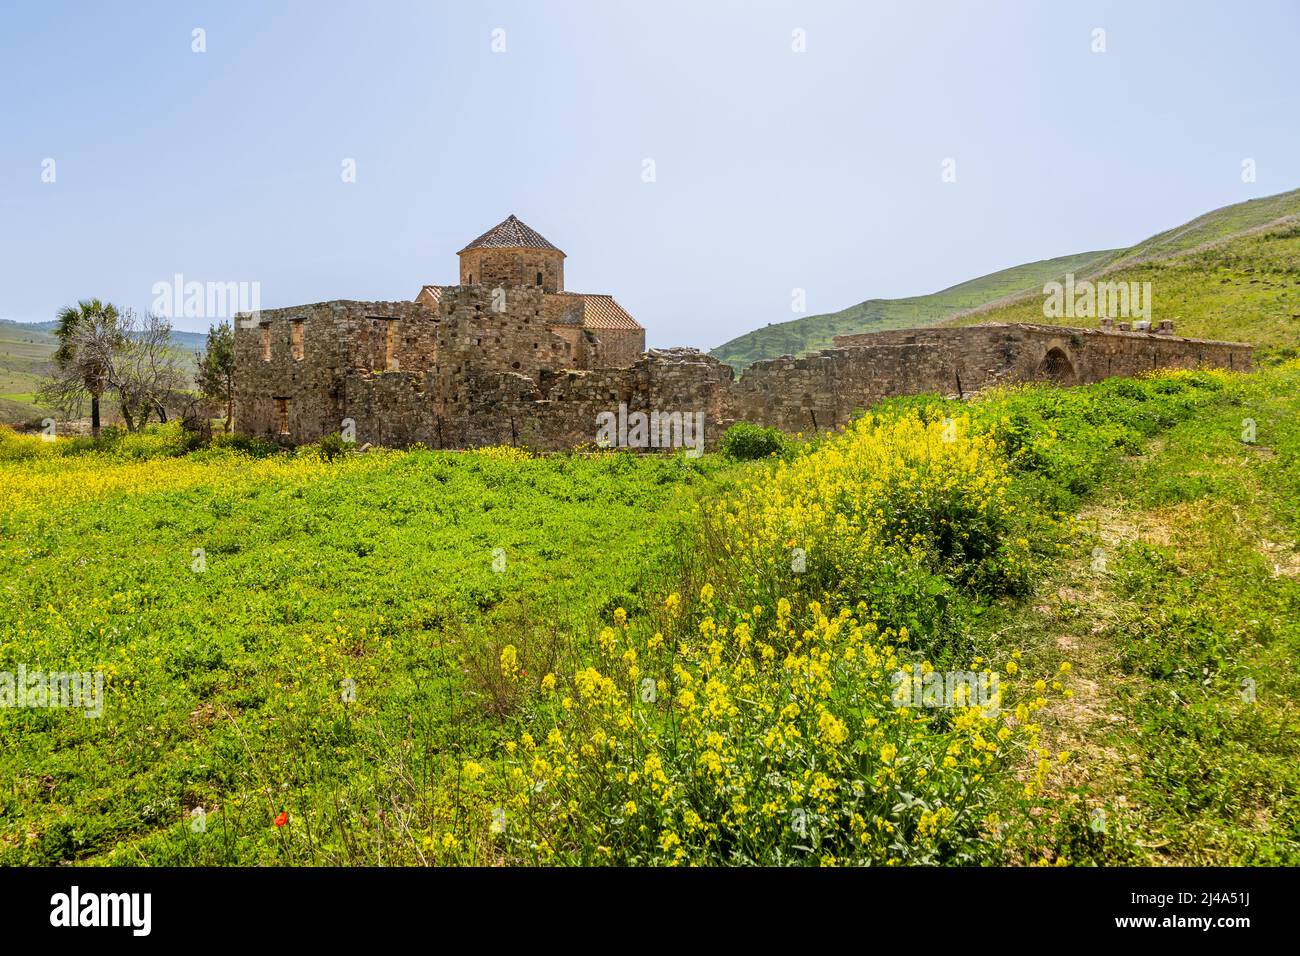 Ruins of Panagia tou Sinti ortodox Monastery with temple in the center and yellow flowers in the foreground, Cyprus Stock Photo